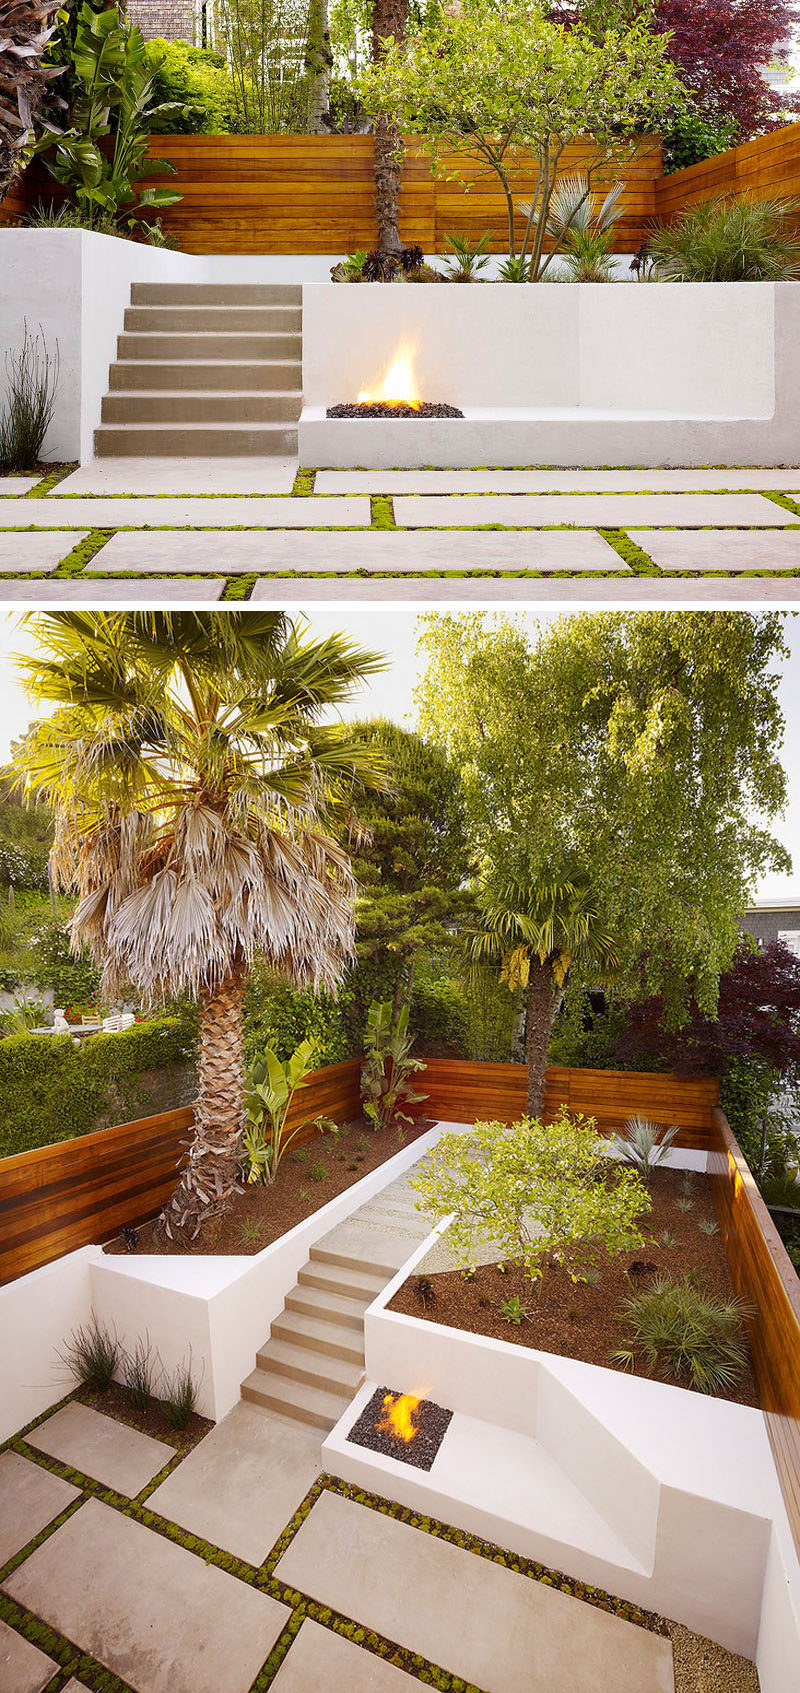 13 Multi Level Backyards To Get You Inspired For A Summer Backyard